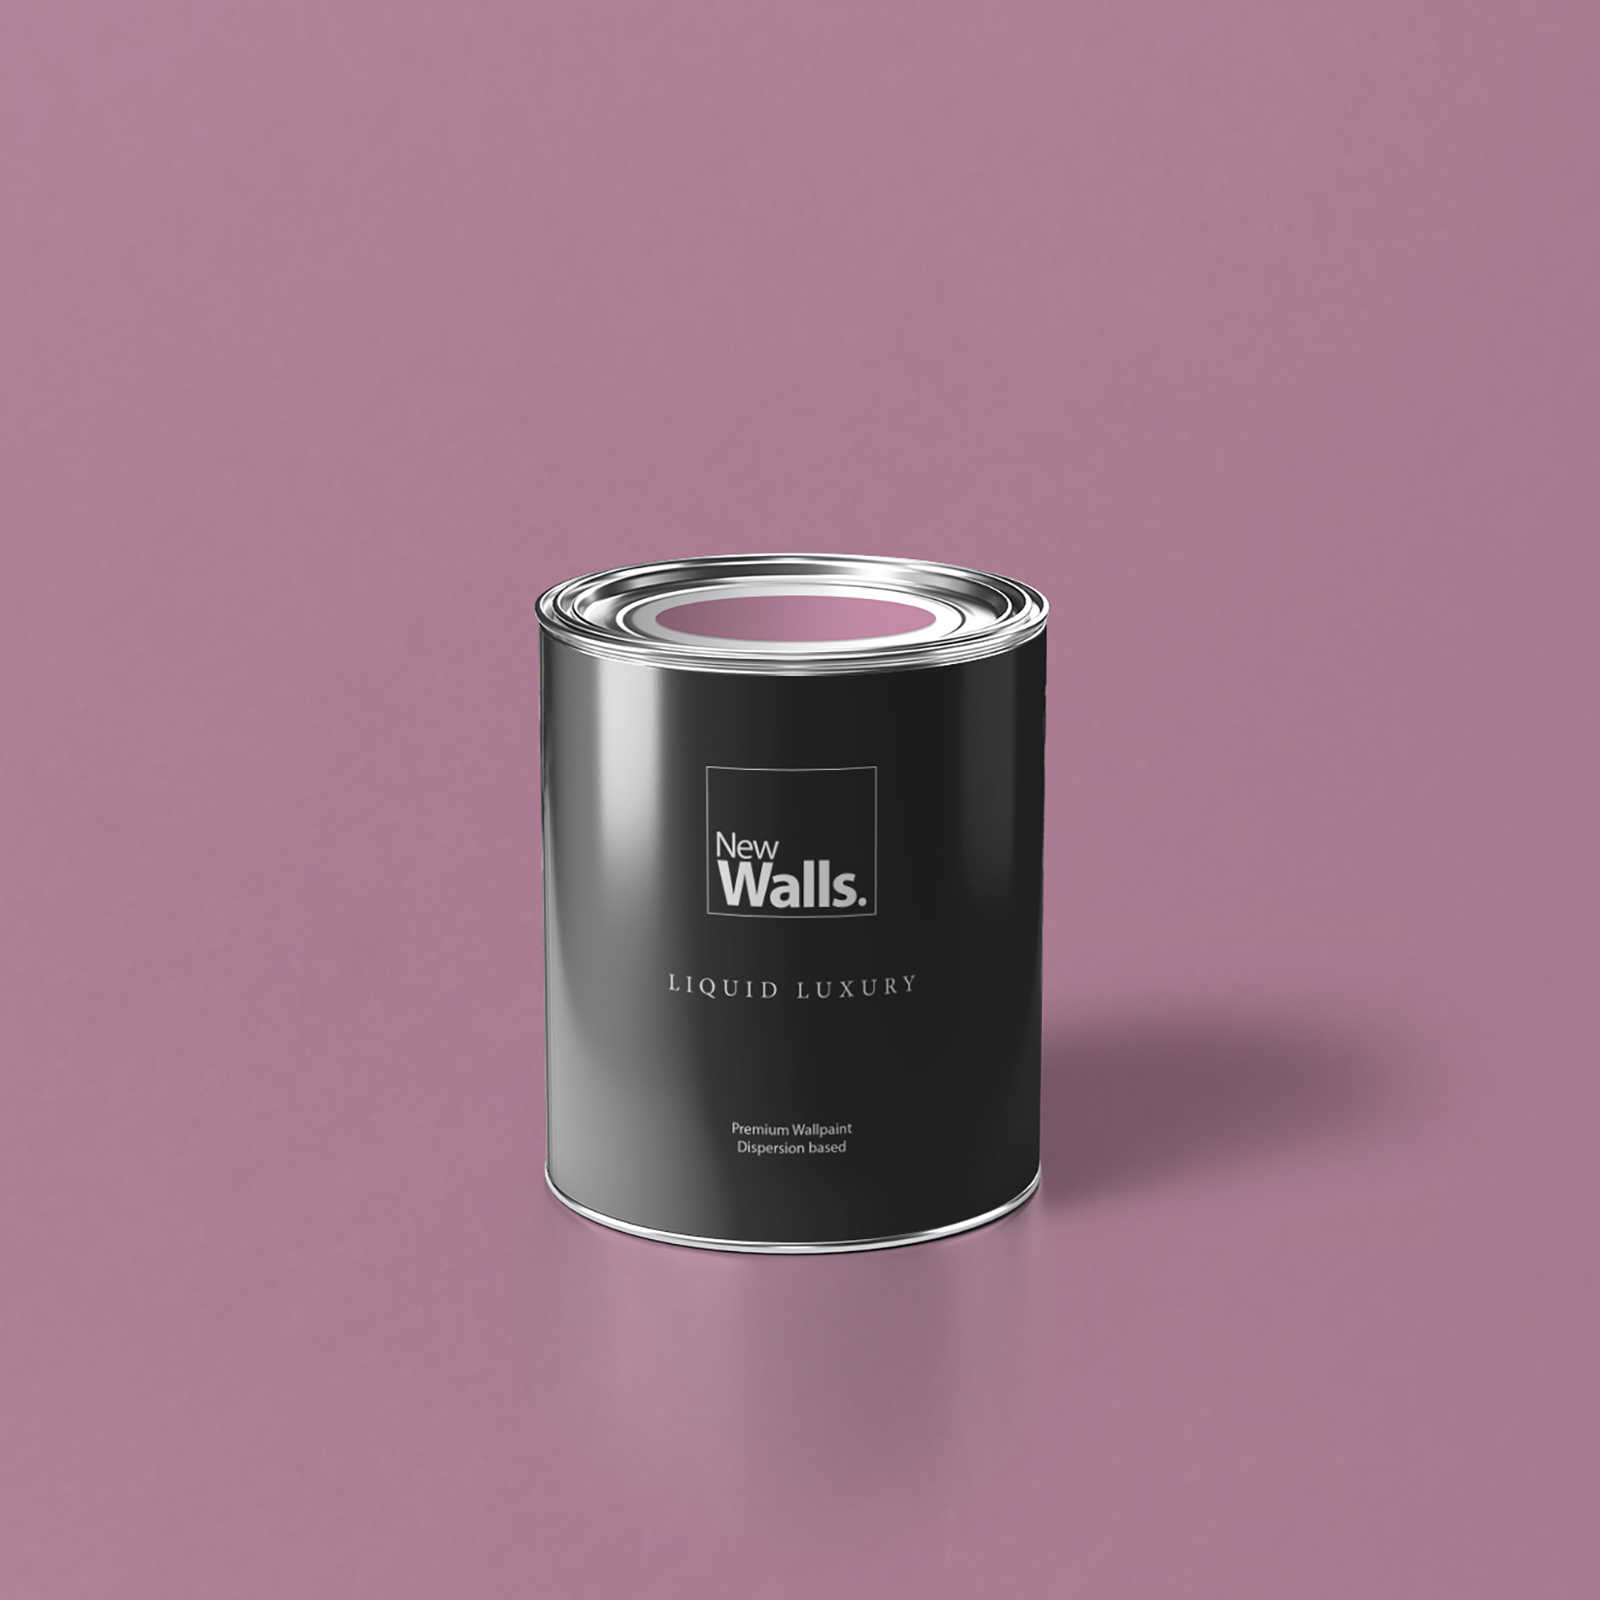         Premium Wall Paint Sensitive Berry »Beautiful Berry« NW210 – 1 litre
    